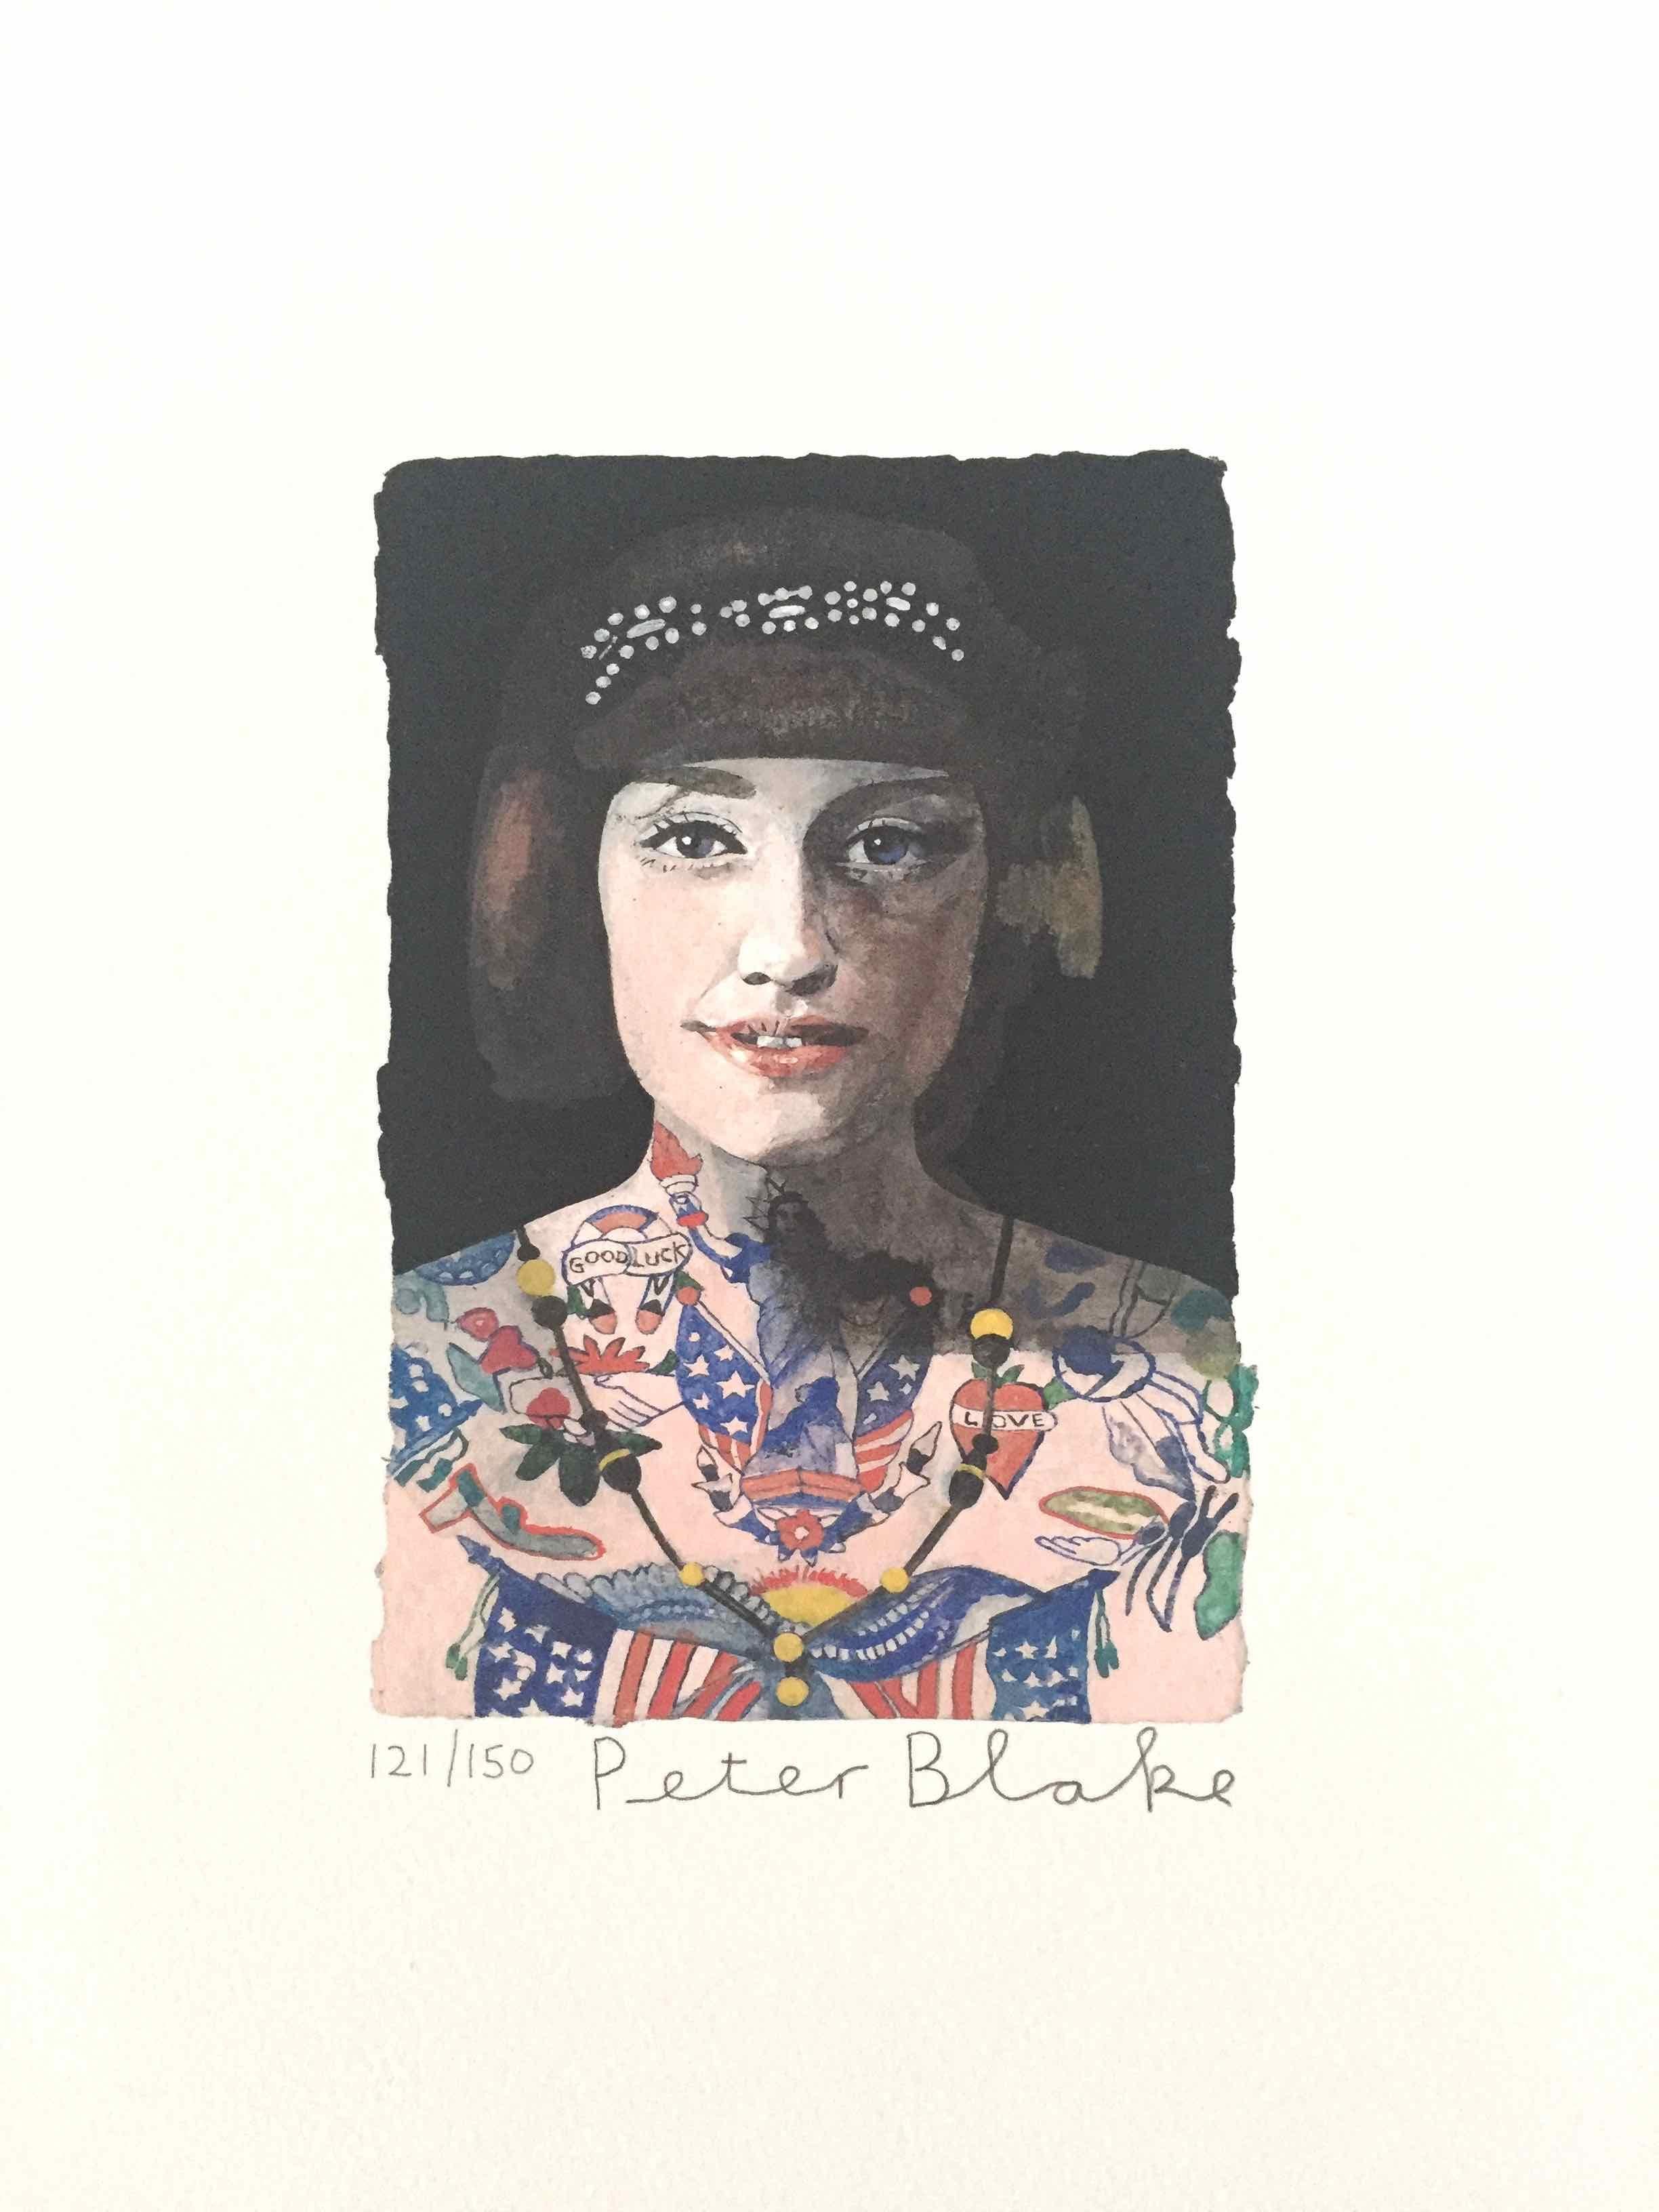 Tattooed People, Grace, 2015, Archival limited edition inkjet print on photo rag satin paper, Edition 121/150, 11 × 8 3/10 in, 28 × 21 cm, signed and numbered by Sir Peter Blake (unframed)

Widely regarded as the godfather of British Pop art and the